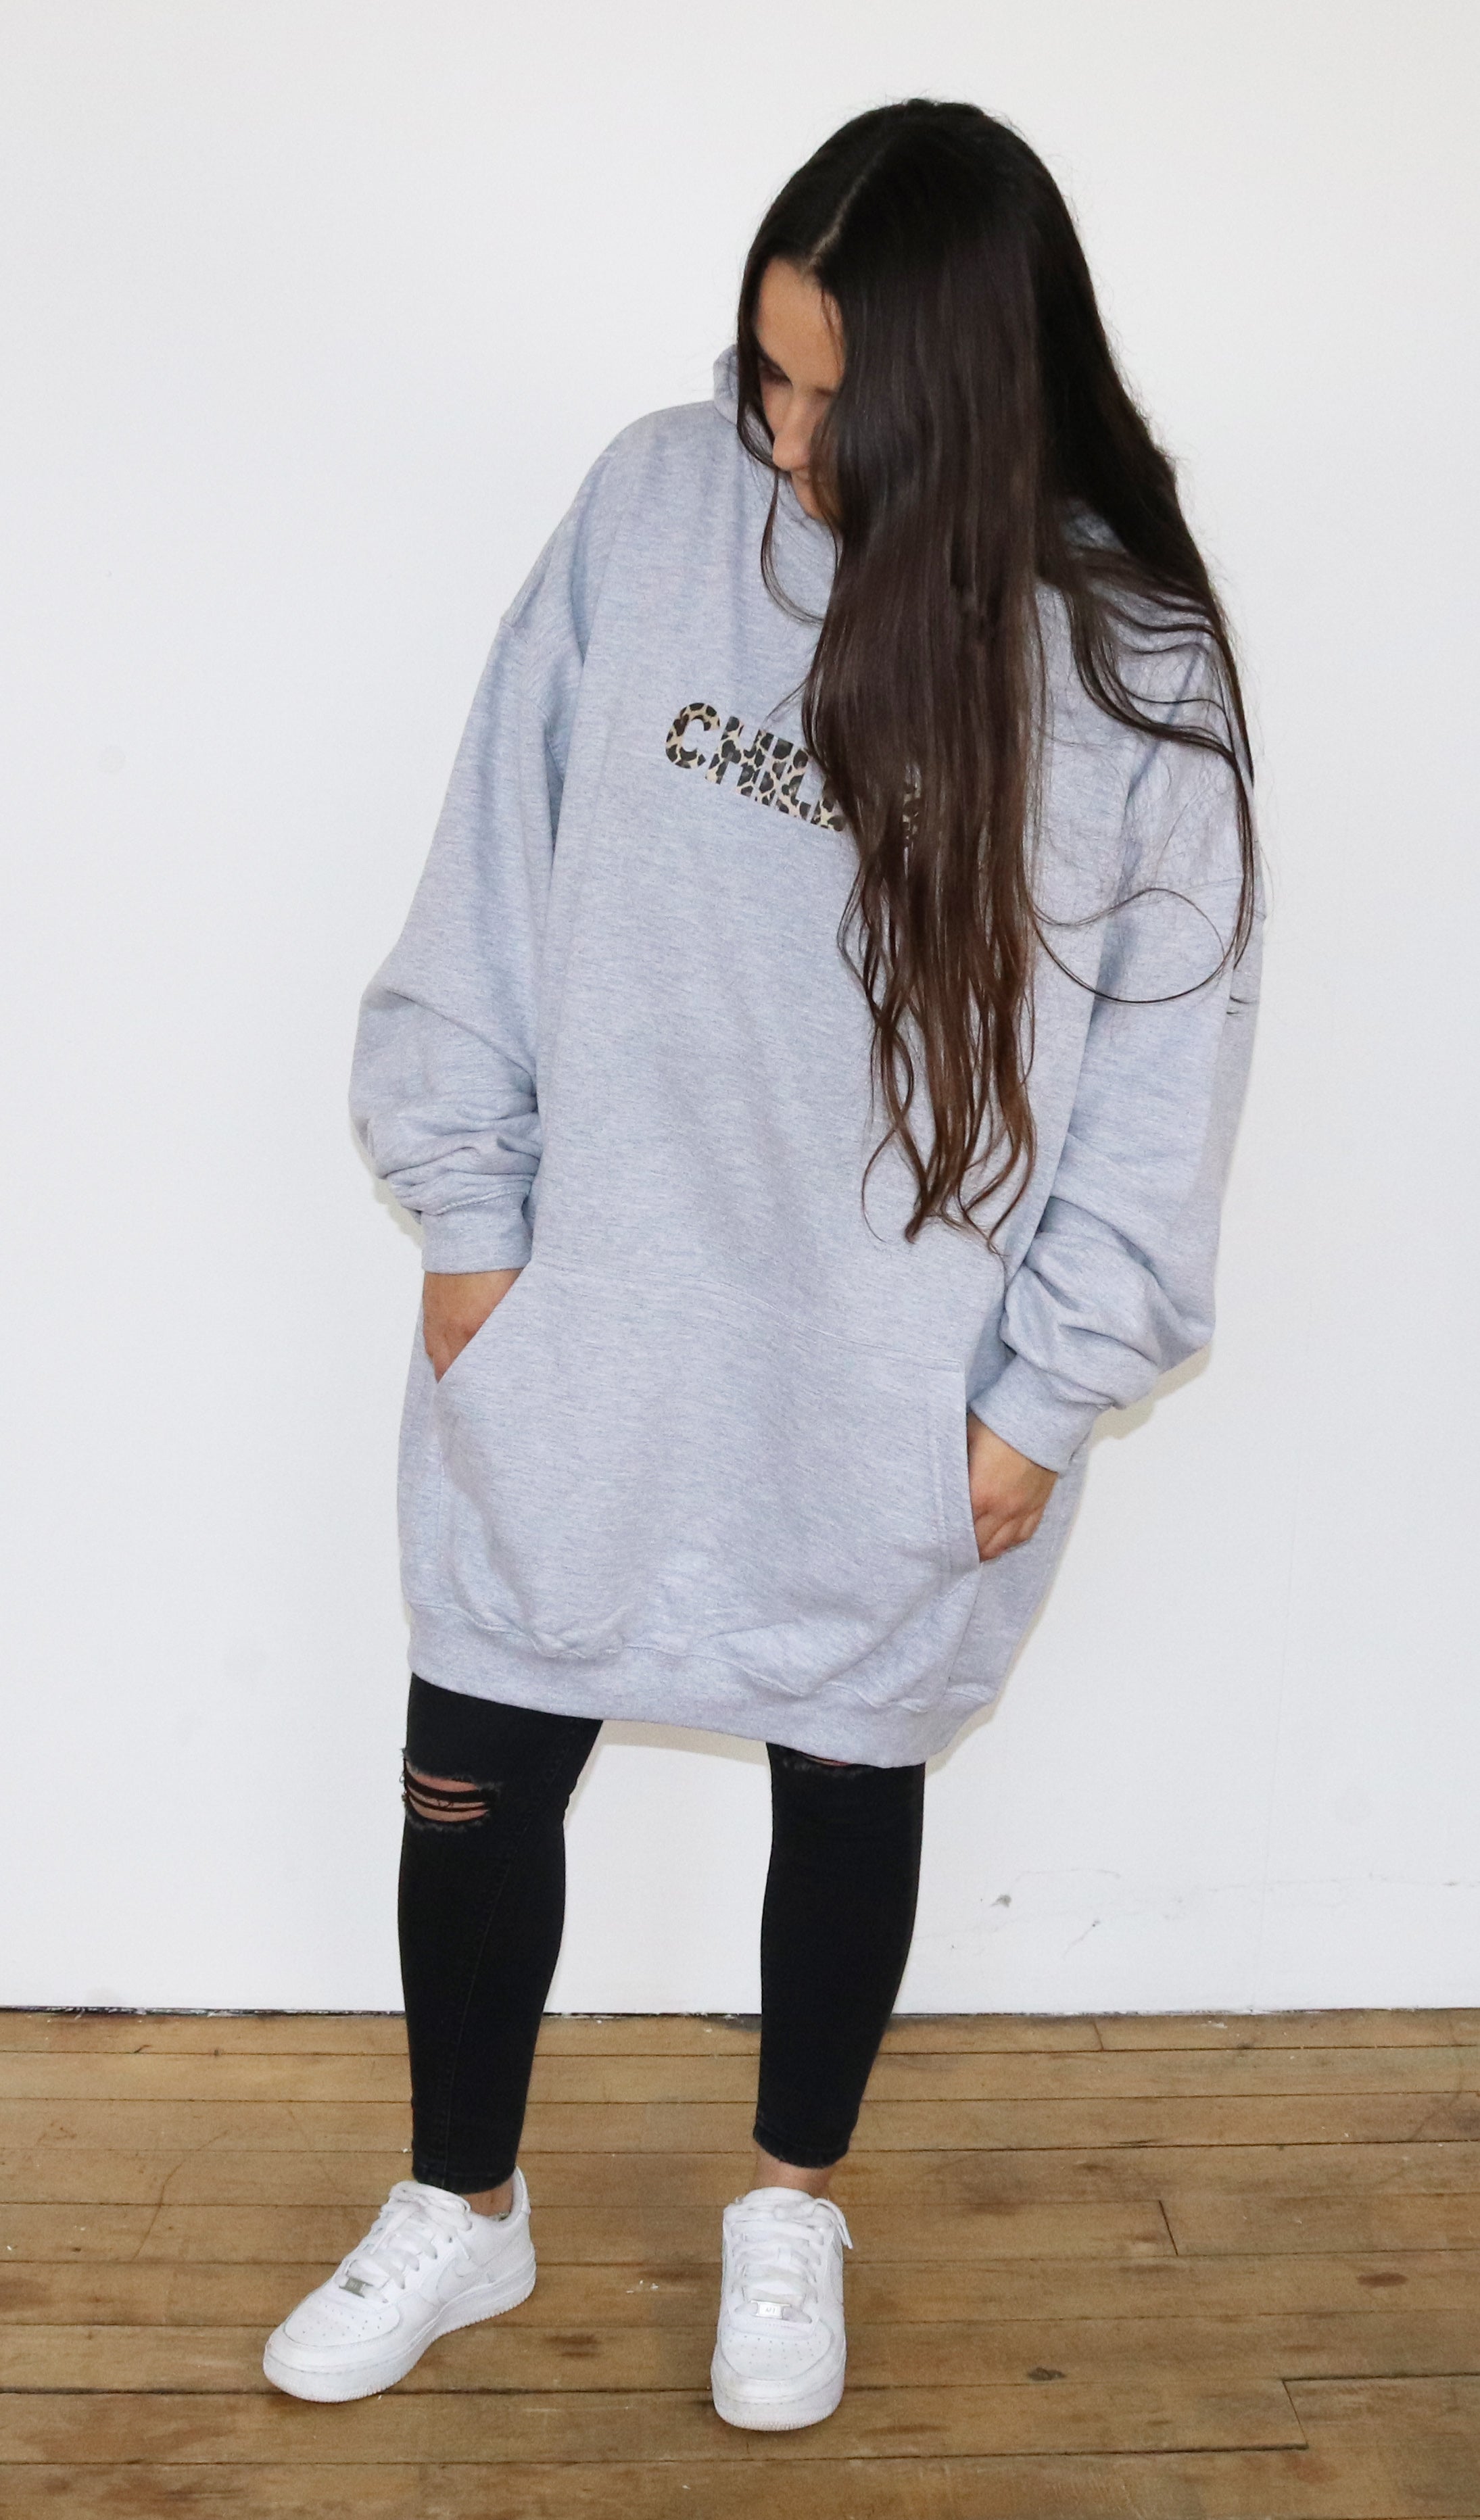 Chill Day - Huge Oversized Comfy Original Hoody